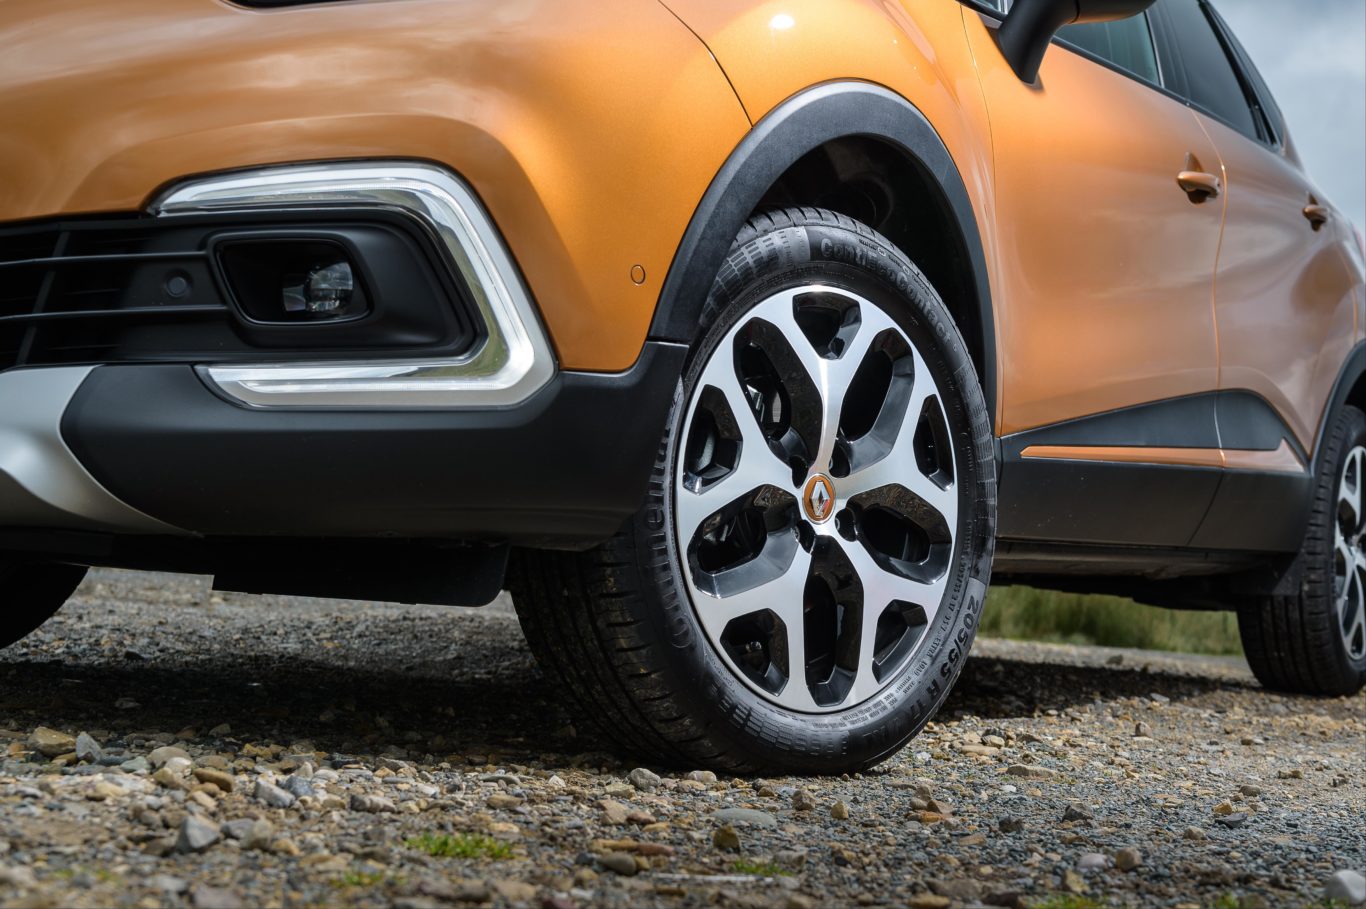 Large alloy wheels help add to the car's presence